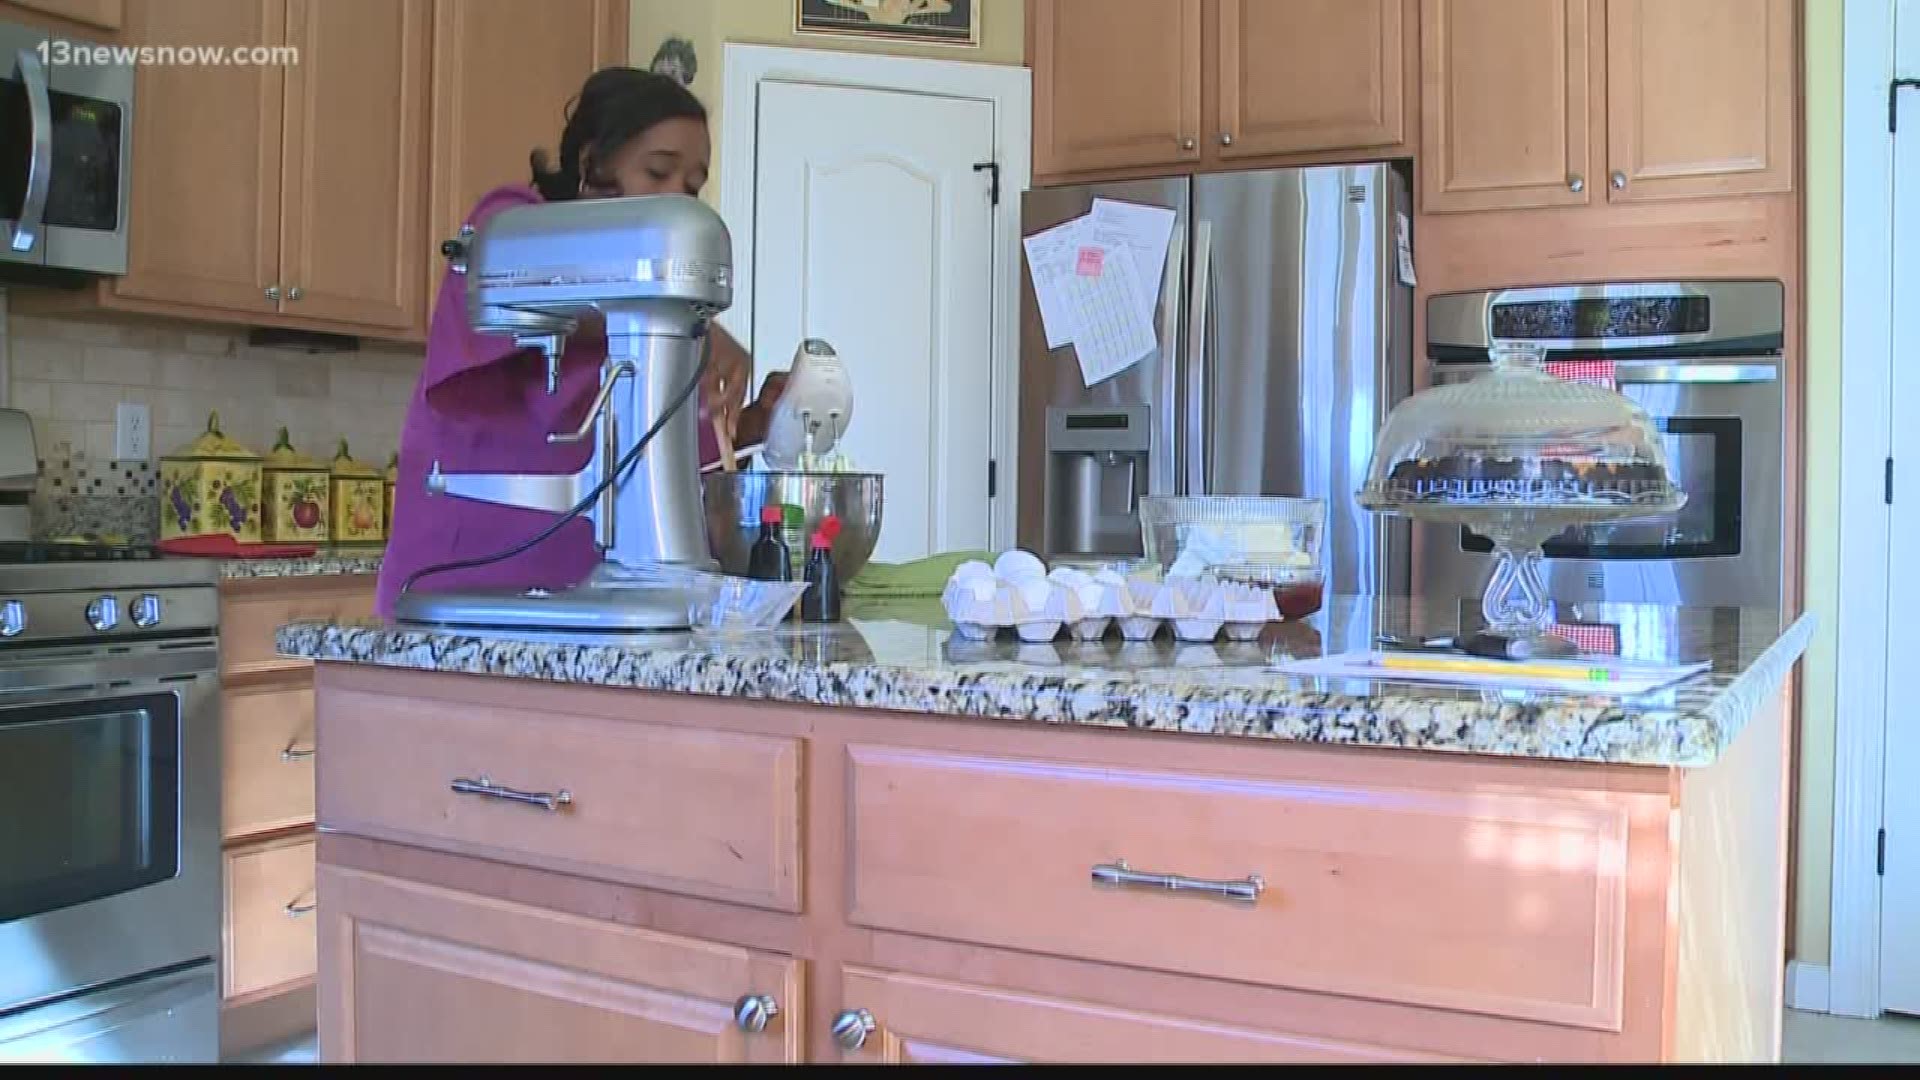 A furloughed IRS worker in Chesapeake is going back to making cheesecakes to earn money.